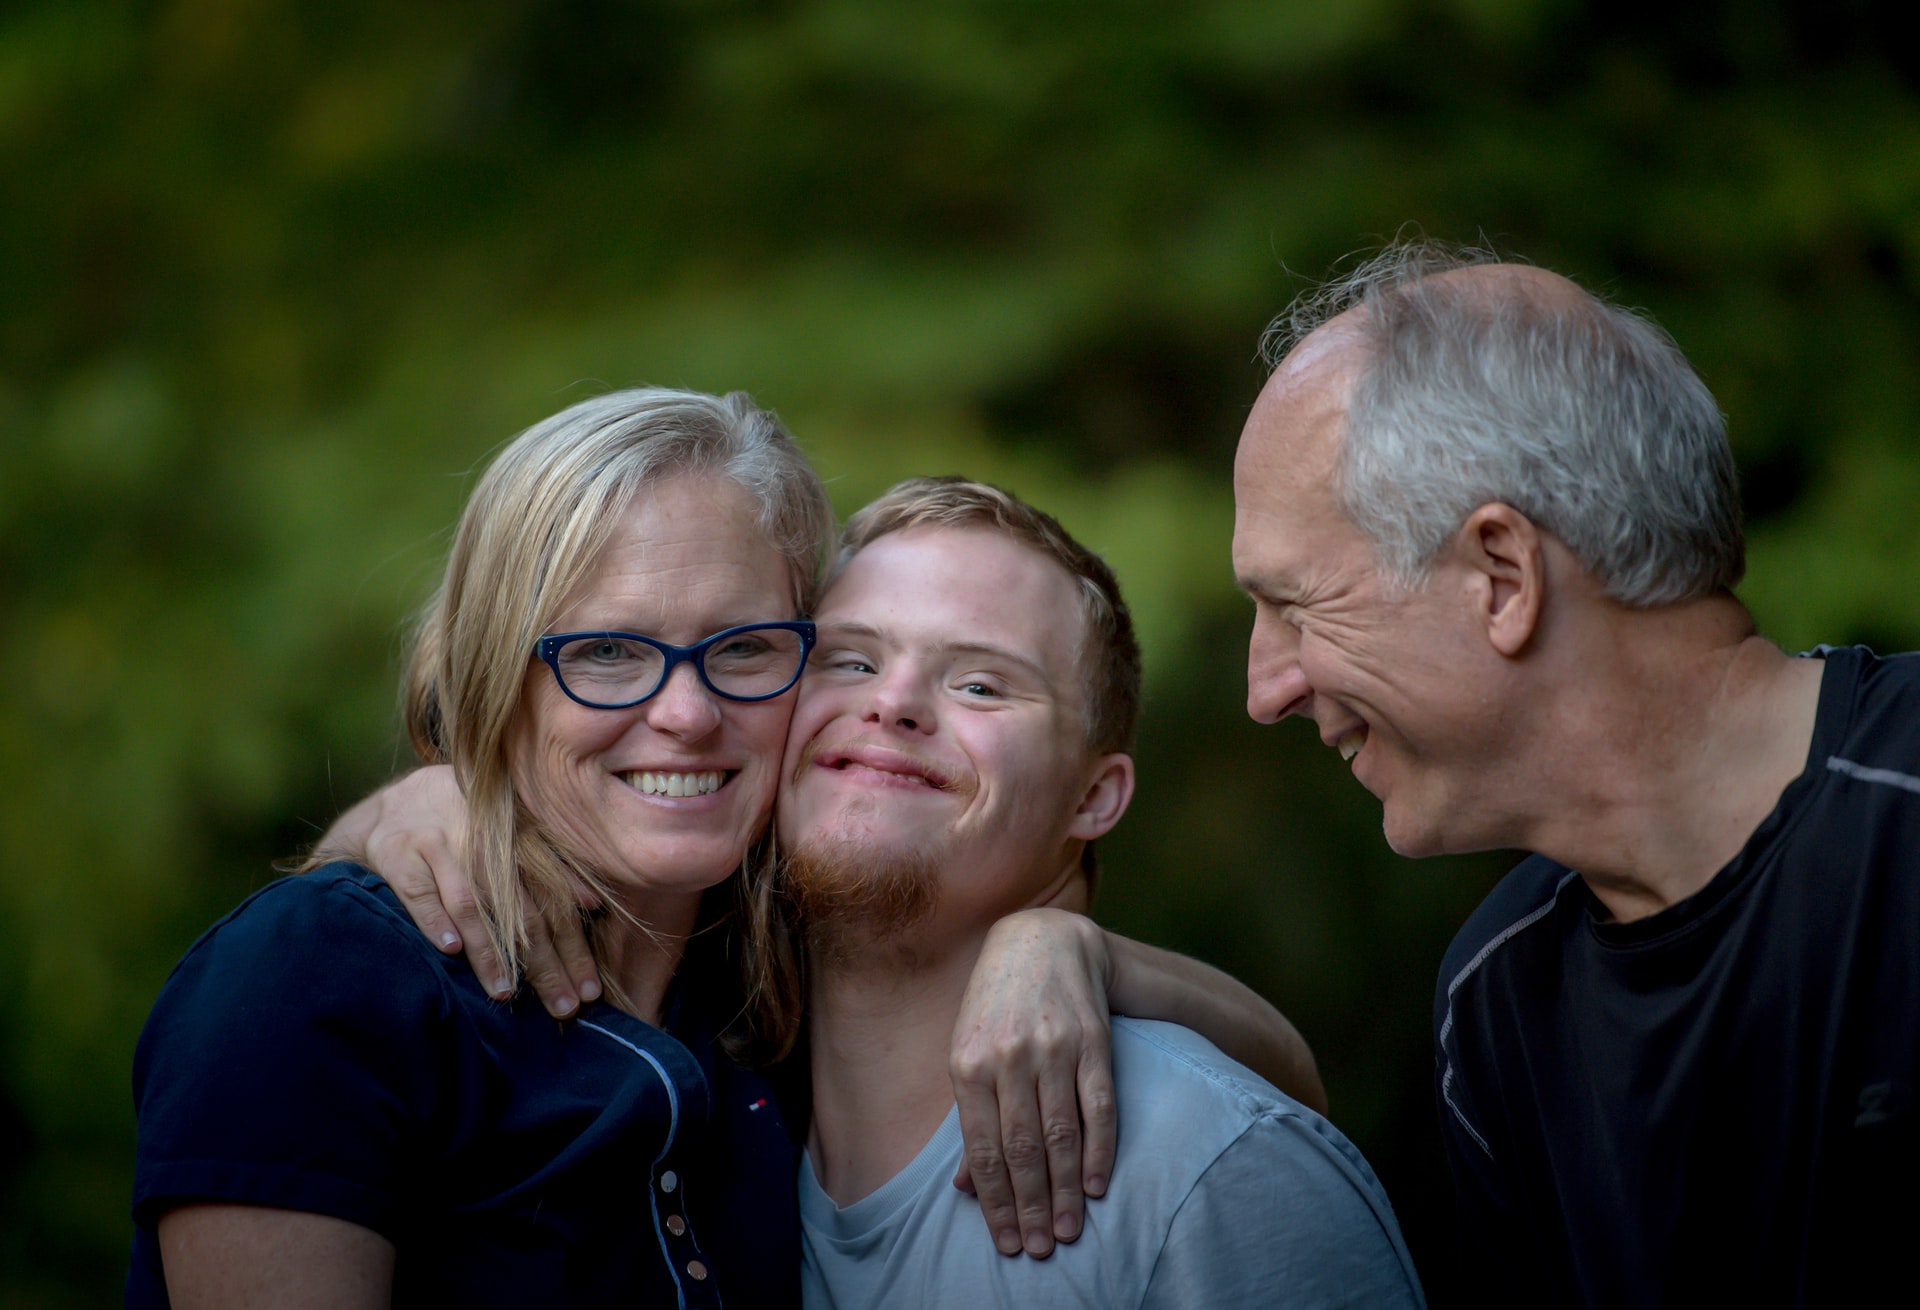 Loving family with down syndrome boy